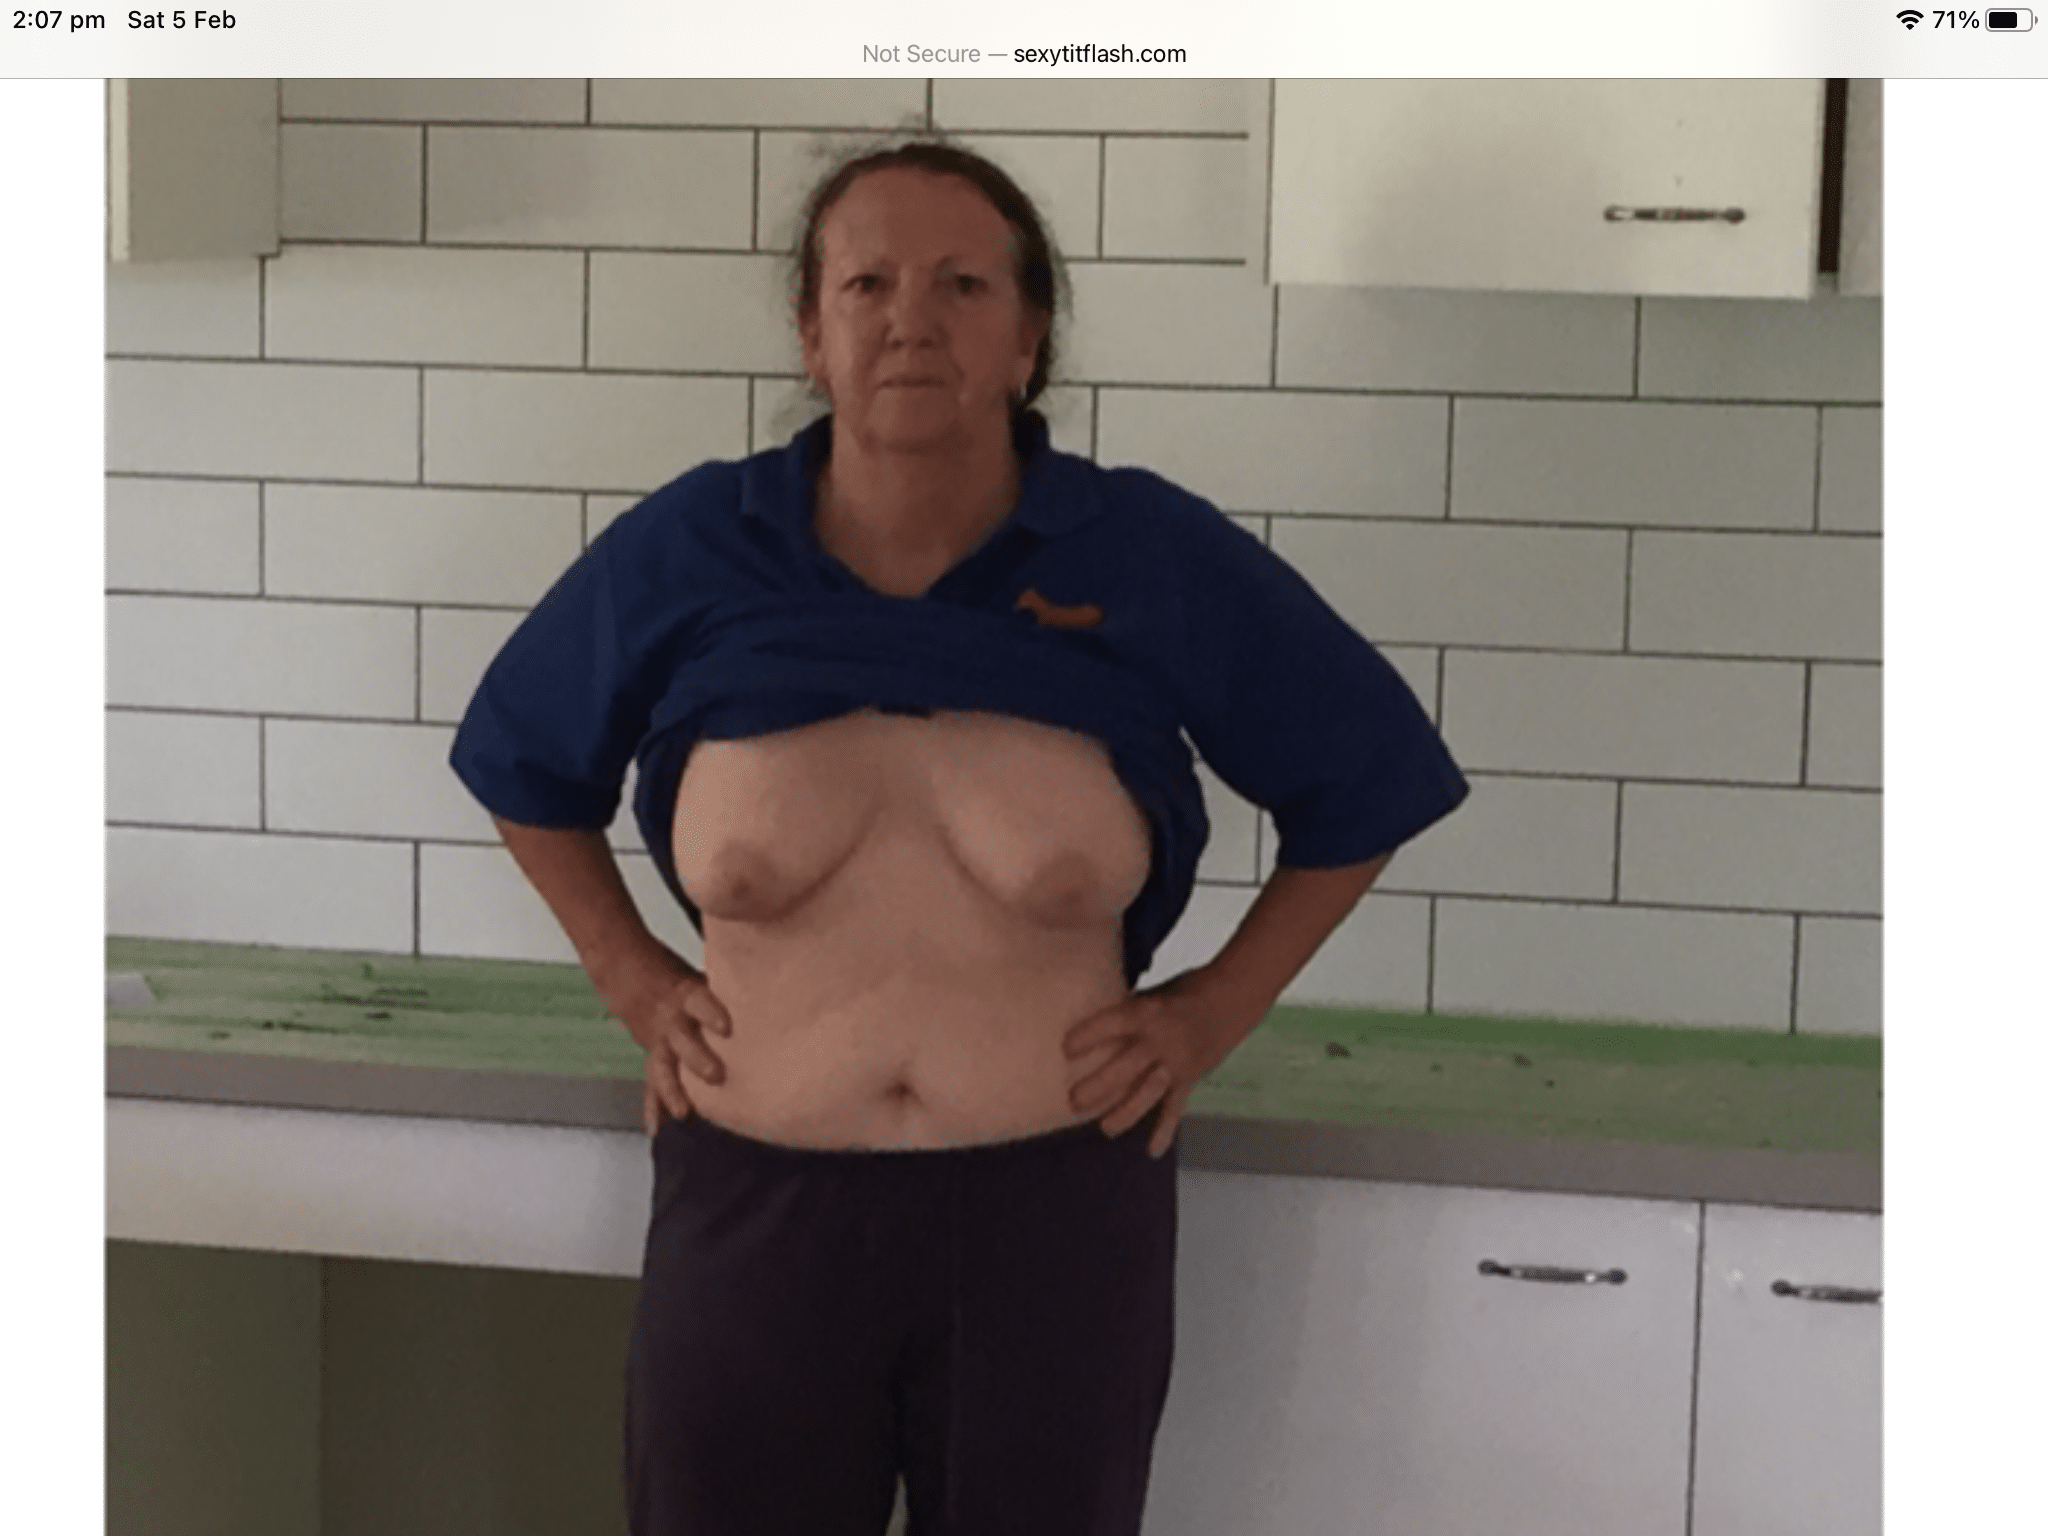 Real Amateurs Mature Flashing Pics Boobs Flash Pics - Having my tits out at work for the boys to enjoy